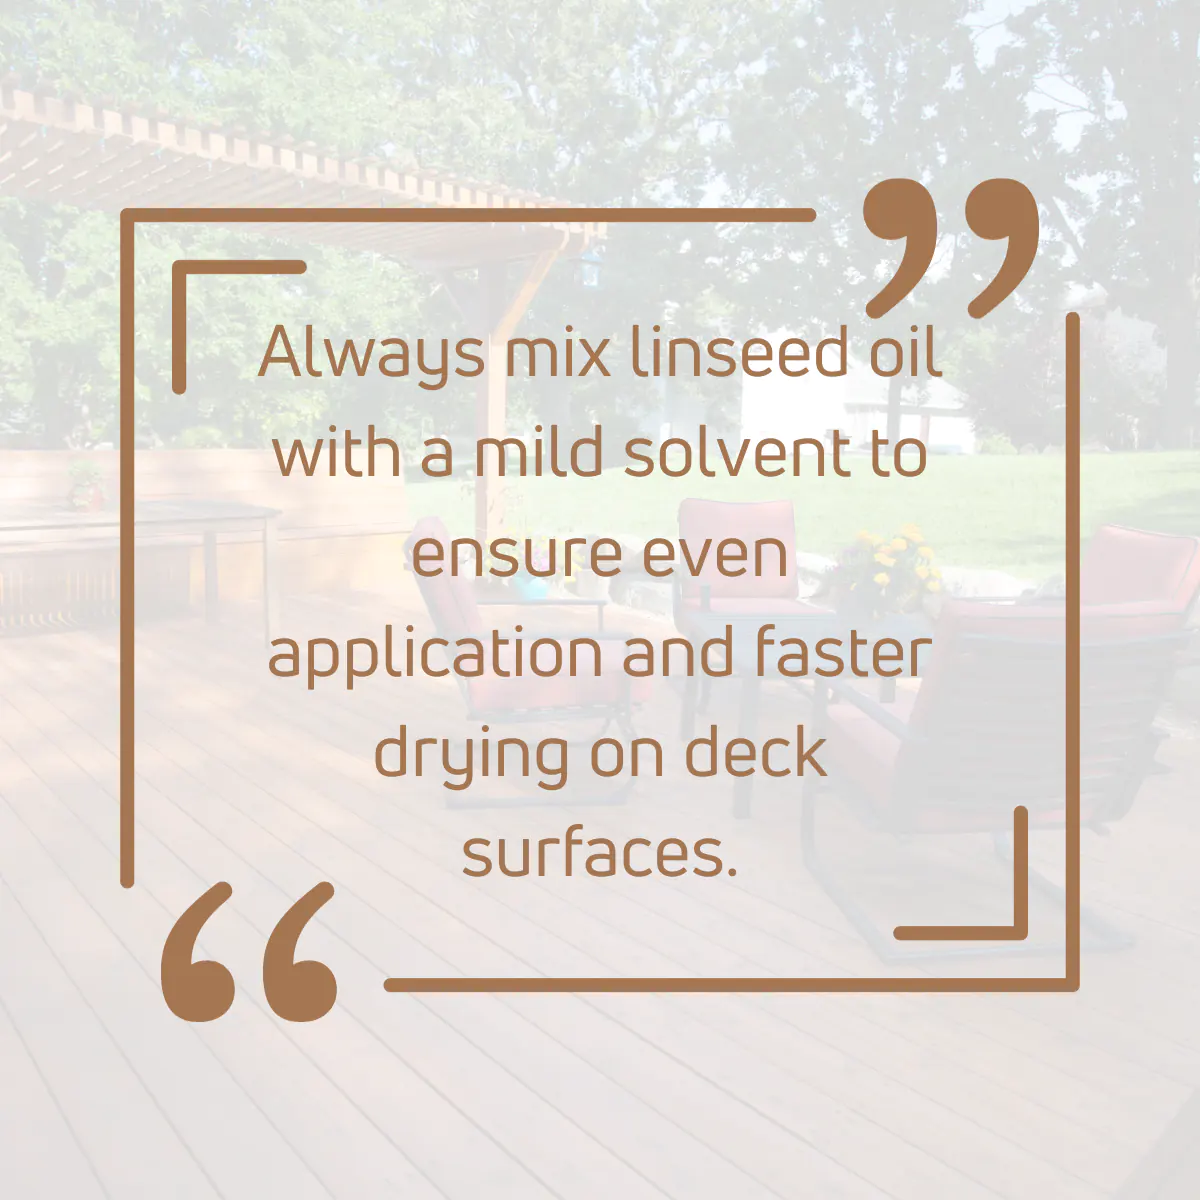 Tip for using linseed oil on decks